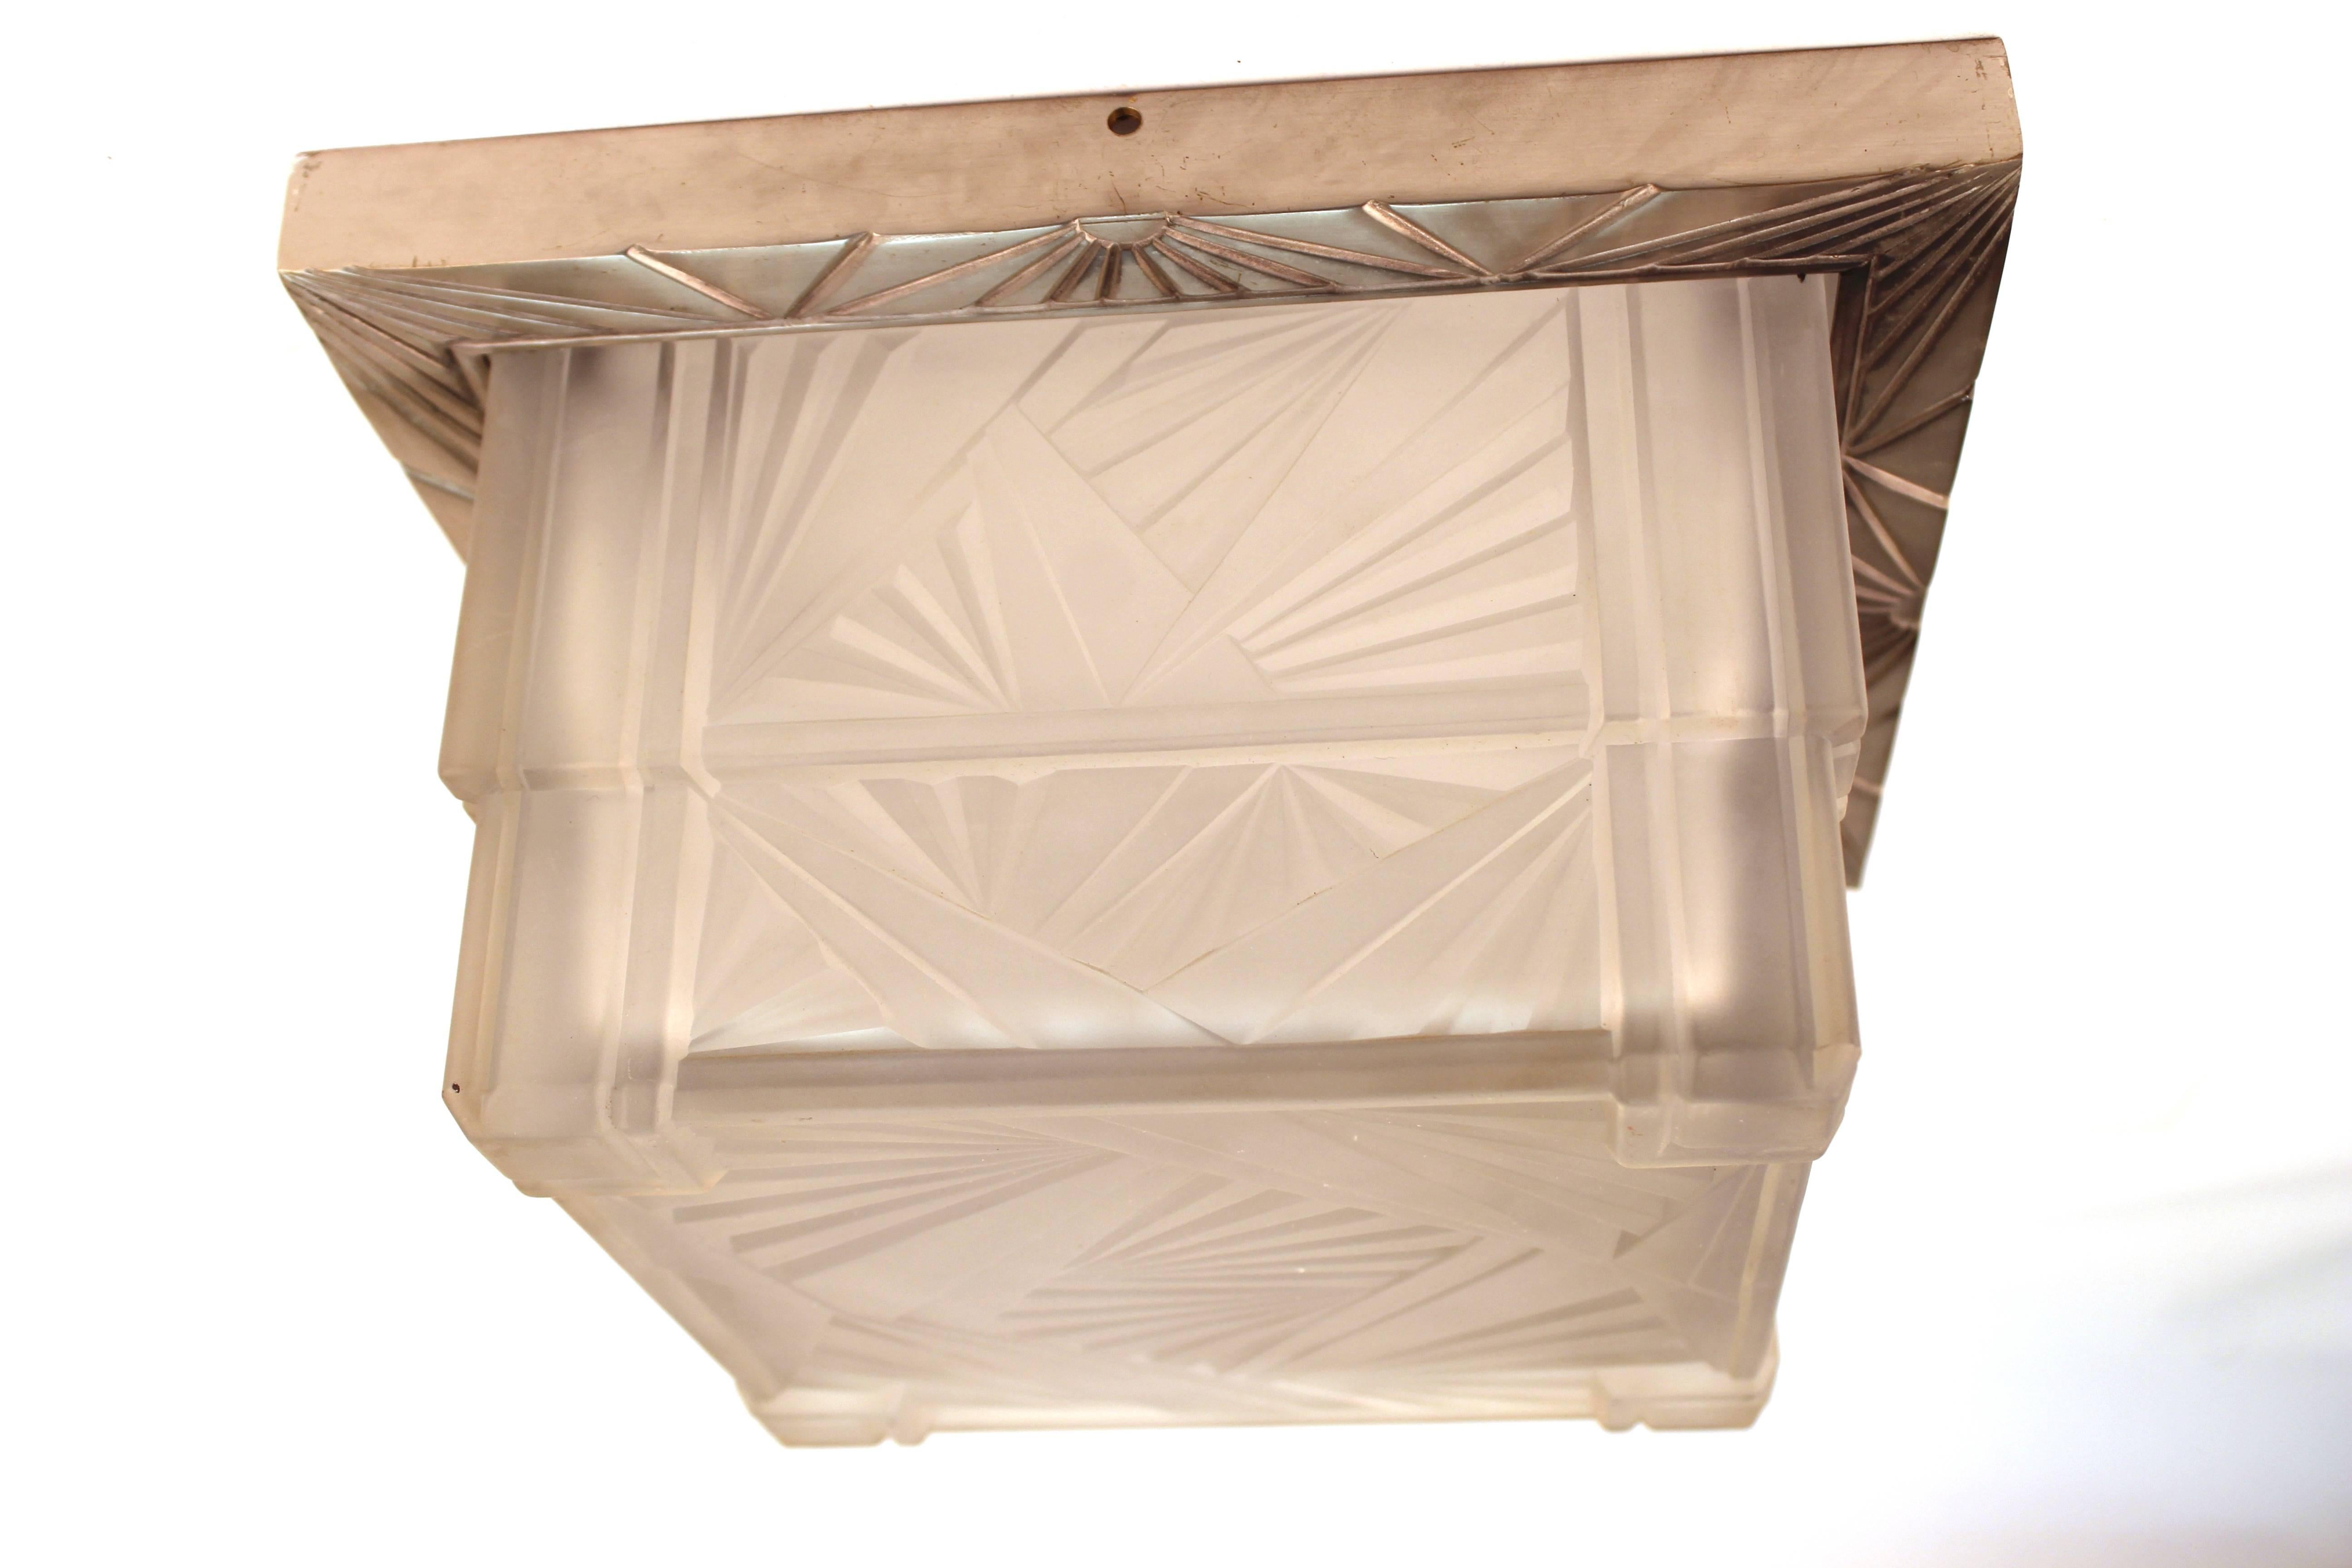 Art Deco flush ceiling fixture with silver-tone metal mount. The ceiling light features a two-tier square centre in cut frosted glass. The glass and metal mount feature geometric radiating patterns throughout. The fixture accepts two-light bulbs.